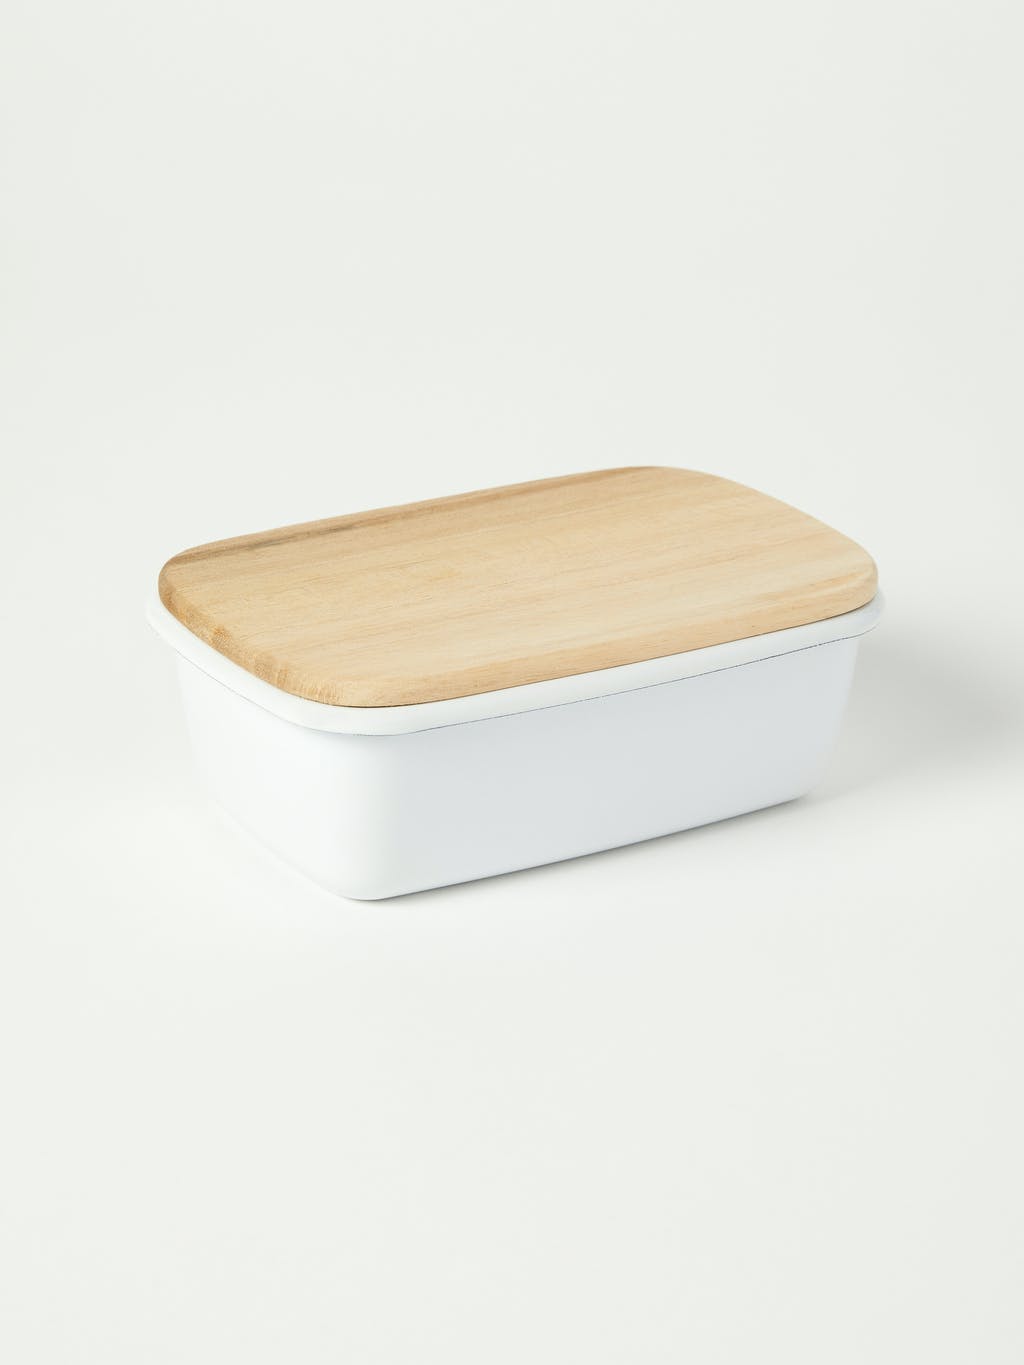 Small Enamel Food Container